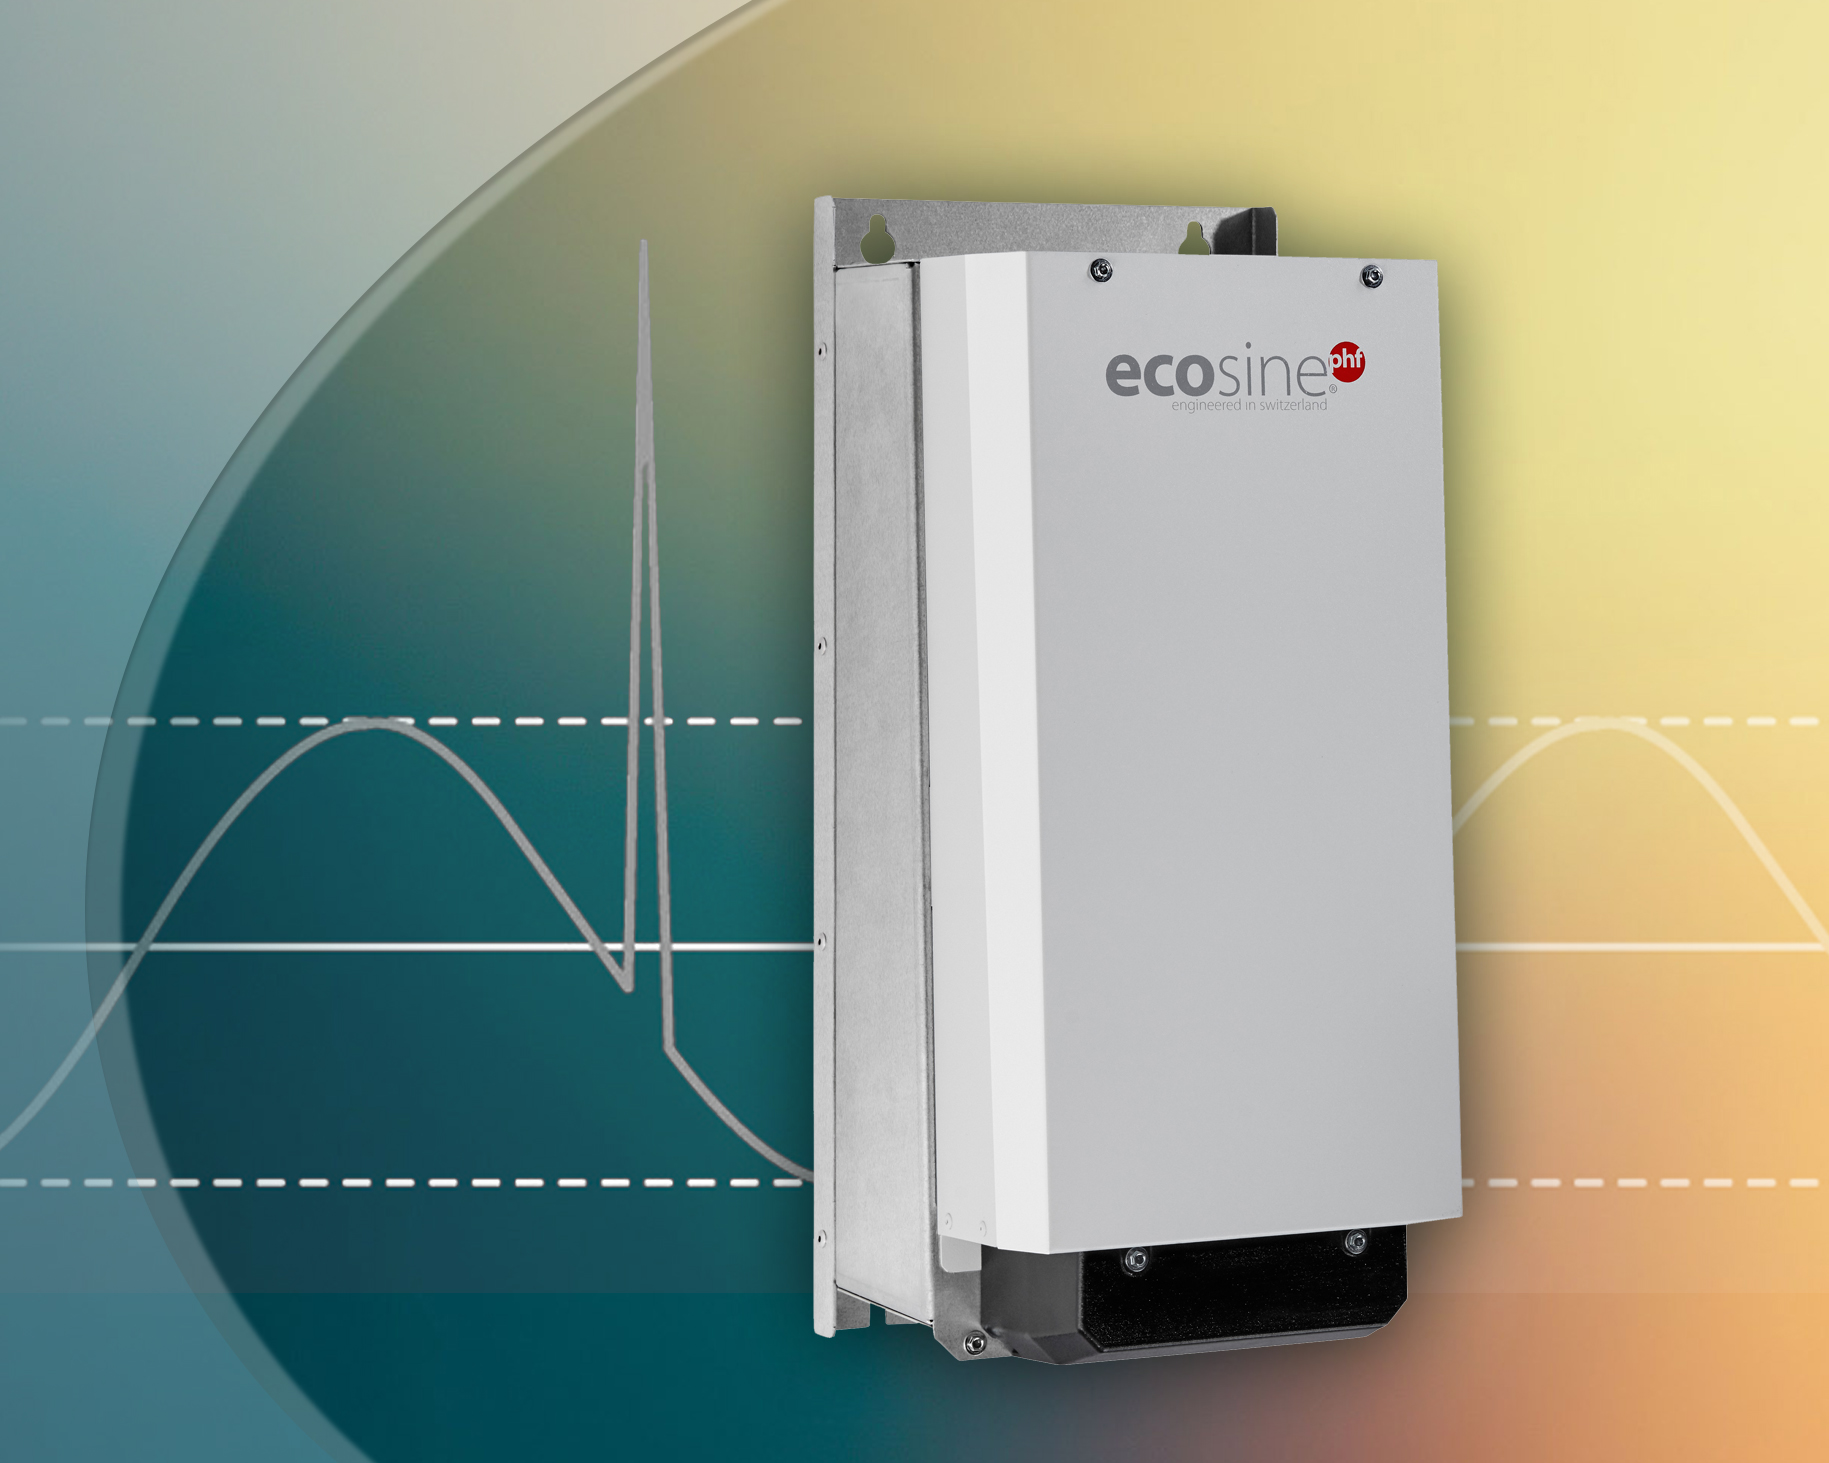 IP20 versions of ecosine evo passive harmonic filters now available from Schaffner 